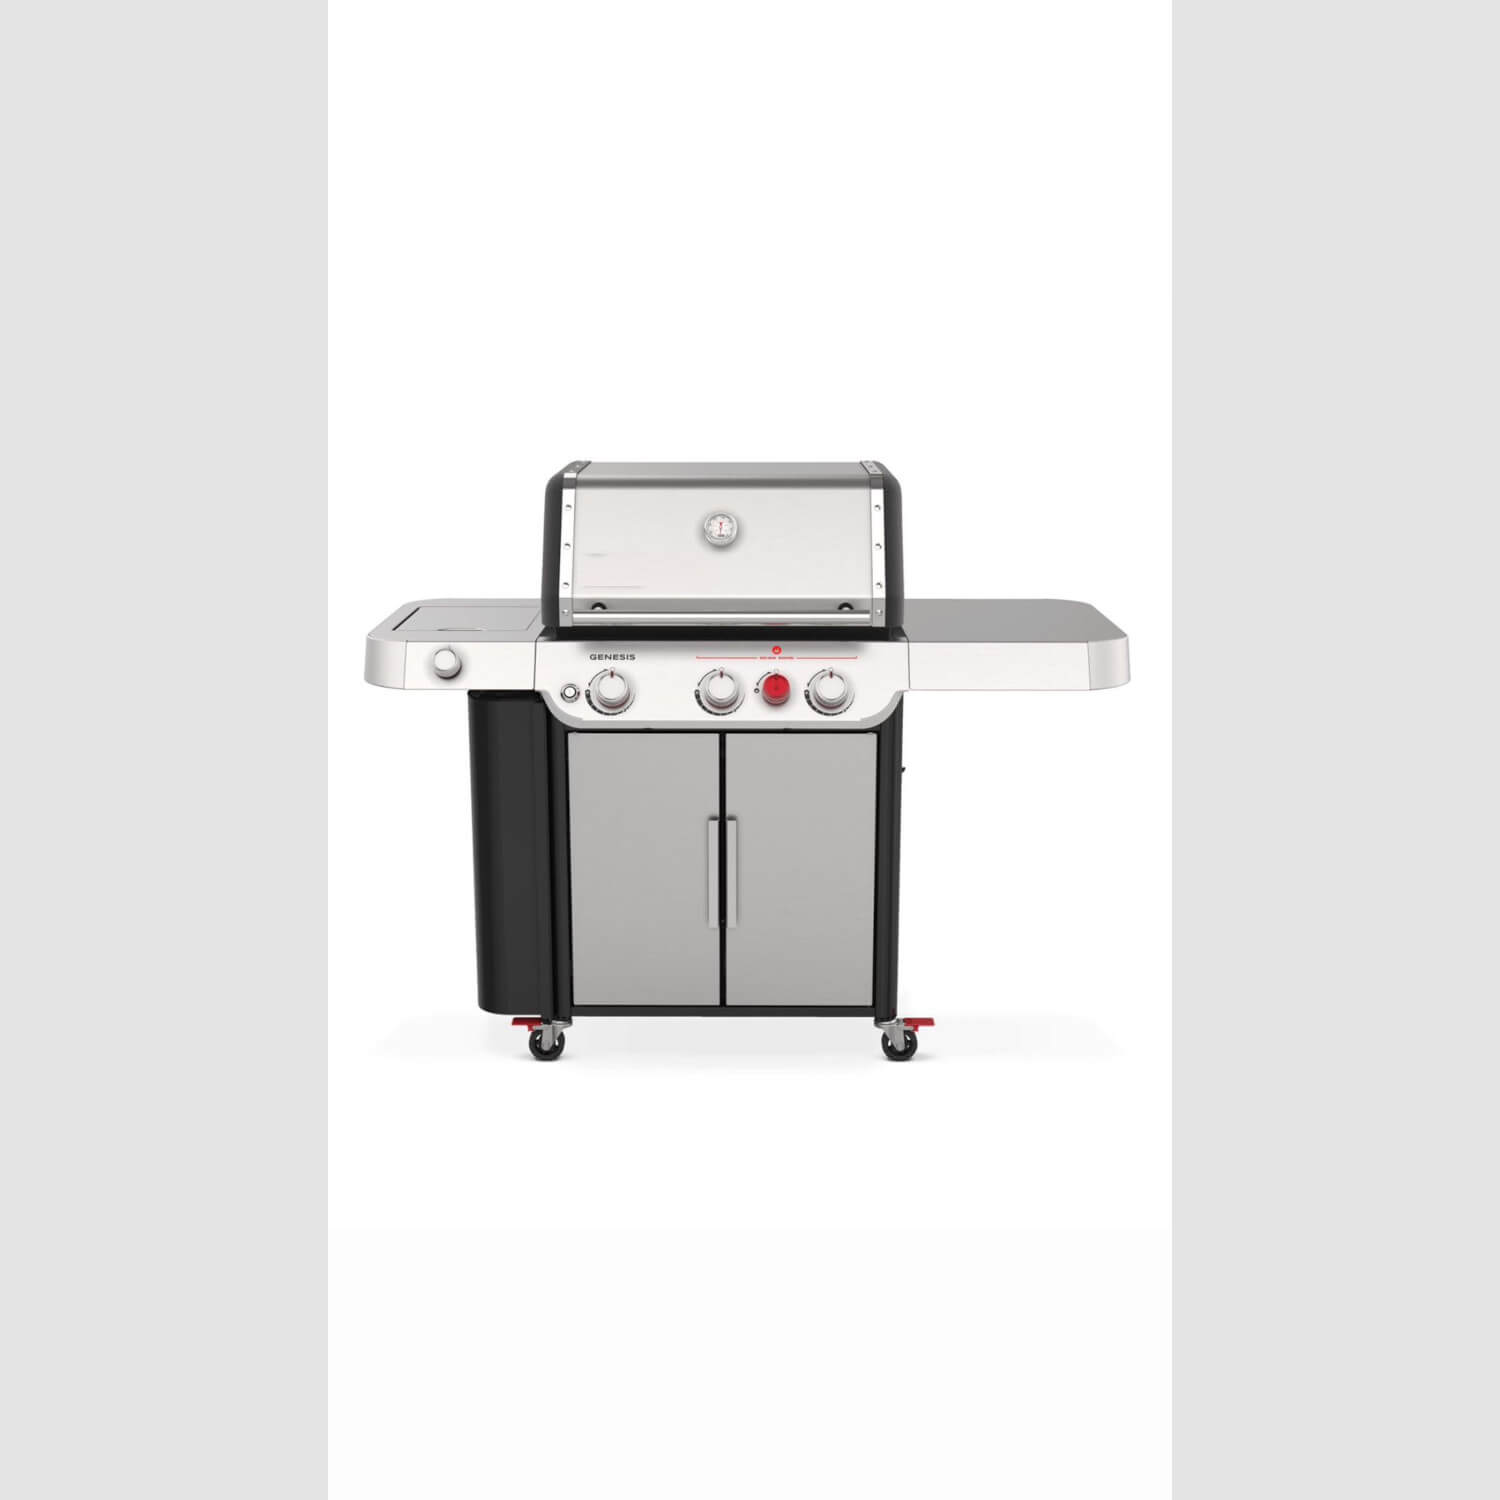 BARBECUE A GAS GENESISS S335